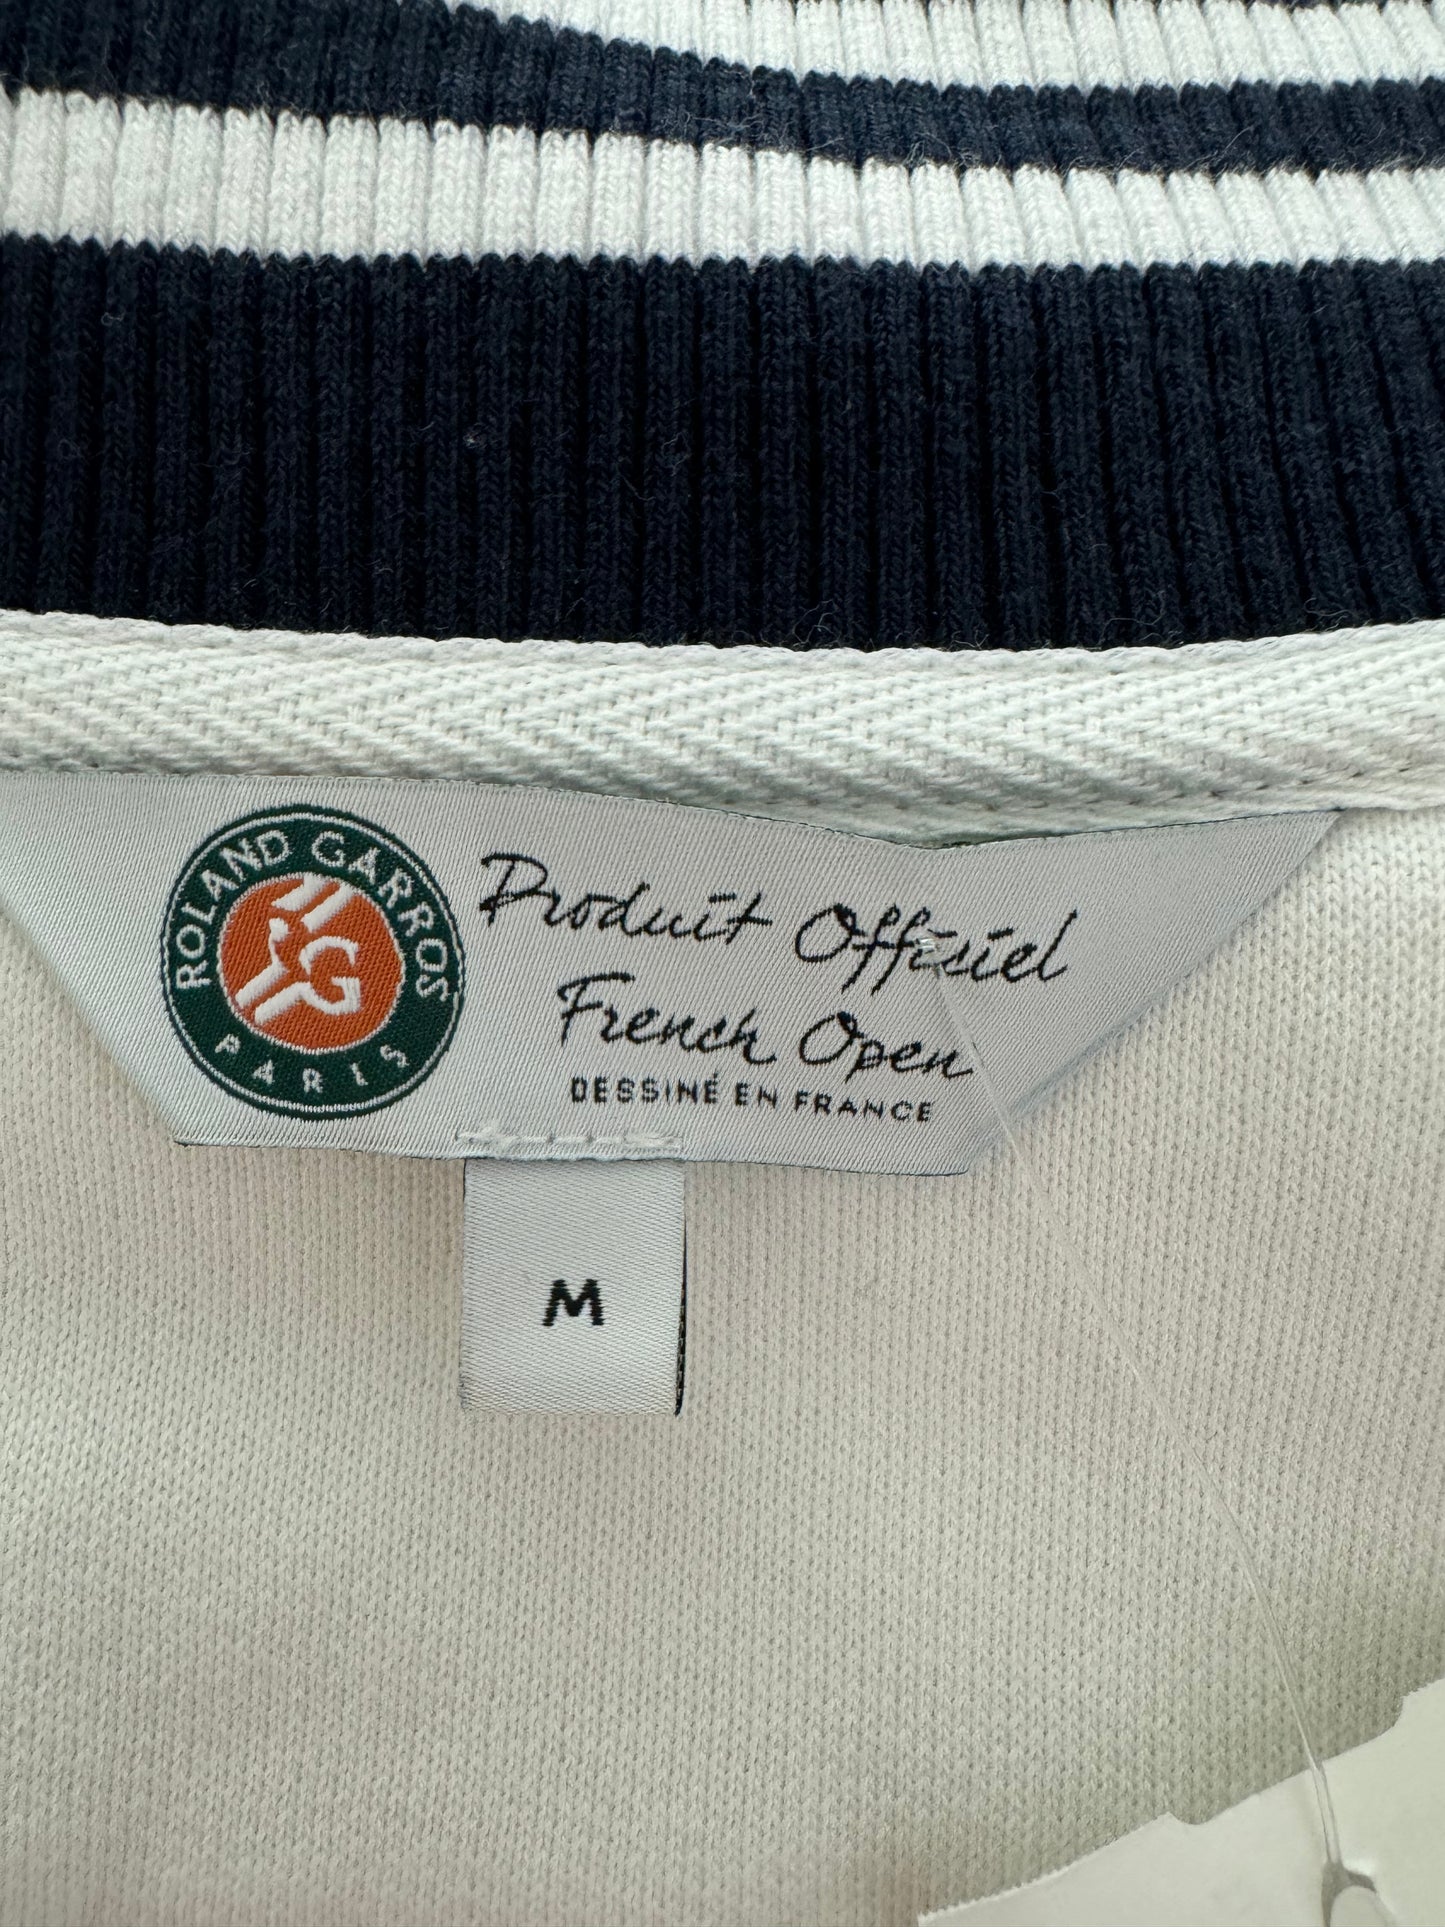 Product Official French Open